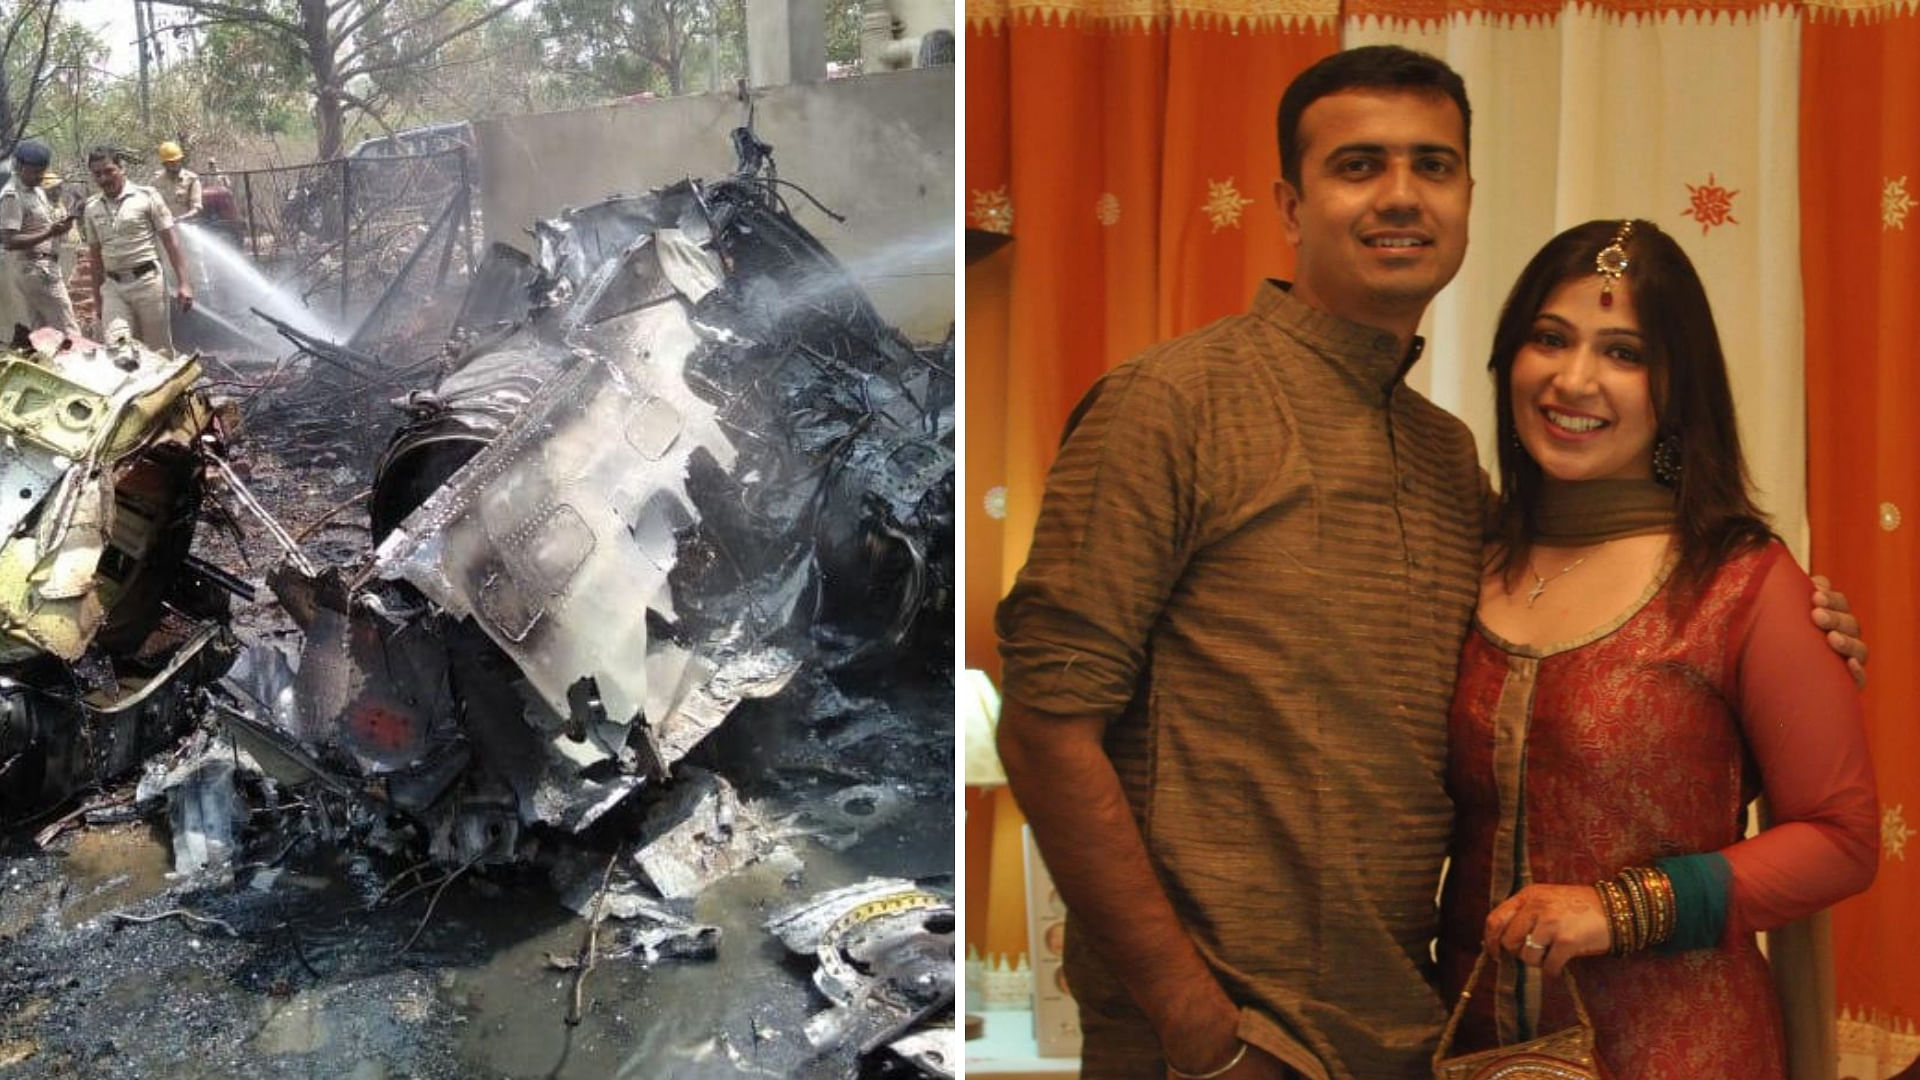 The crash site in Bengaluru; late IAF pilot Sahil Gandhi with his wife (right).